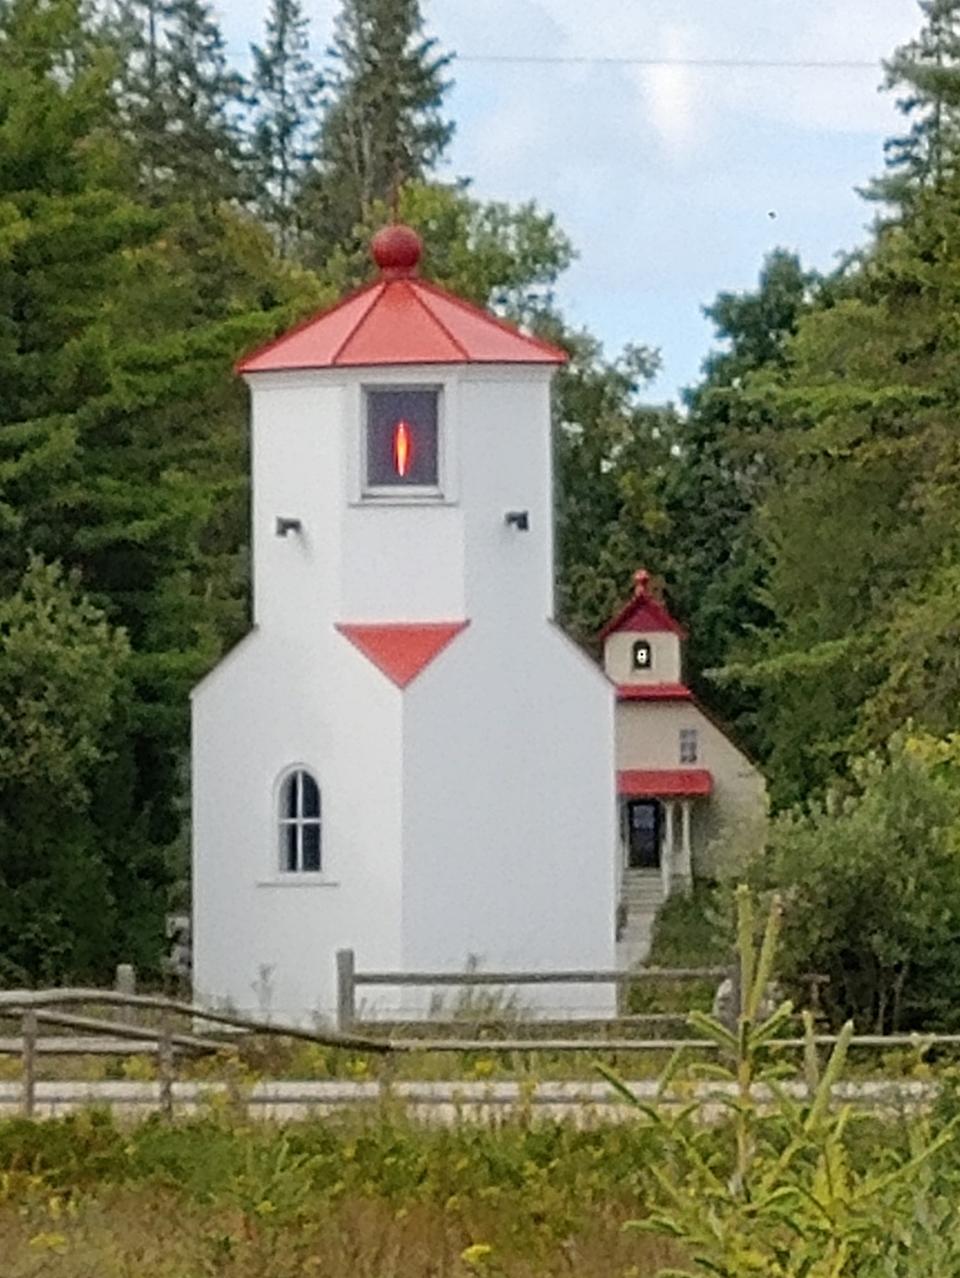 The Lower and Upper Range Lights, a 153-year-old navigational aid off the Lake Michigan shore in Baileys Harbor, are on the grounds of The Ridges Sanctuary. An ADA-accessible boardwalk now connects the two lights, and The Ridges is holding a dedication ceremony for the walkway at 3:30 p.m. Sept. 2.